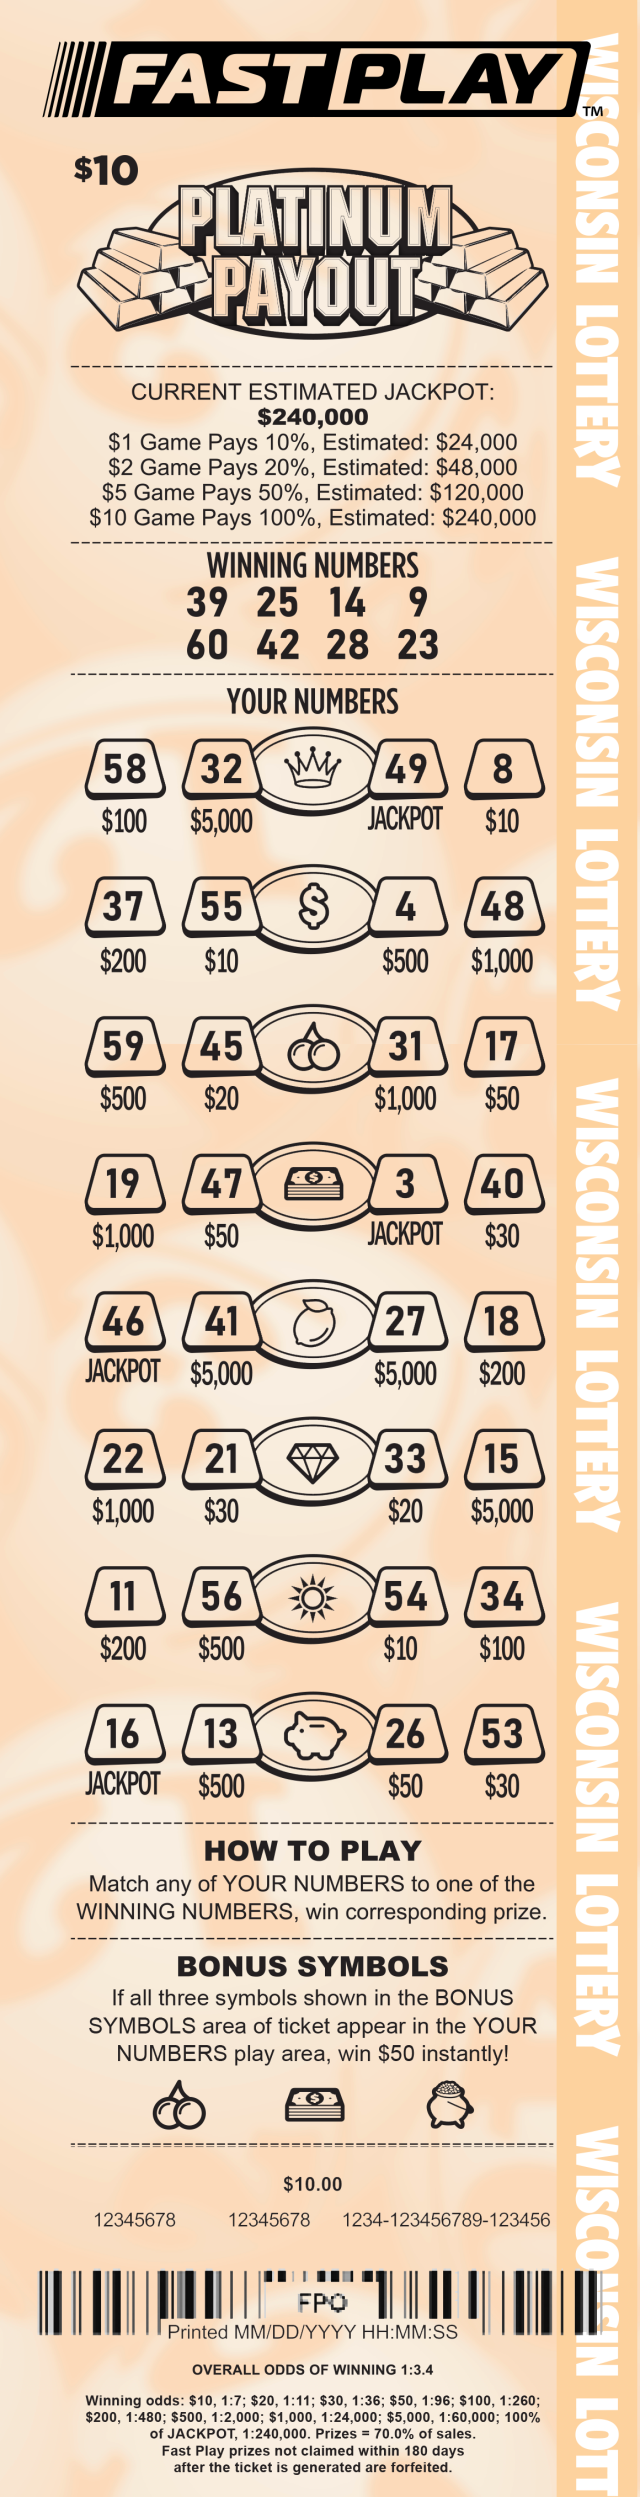 Fast Play Platinum Payout ticket image